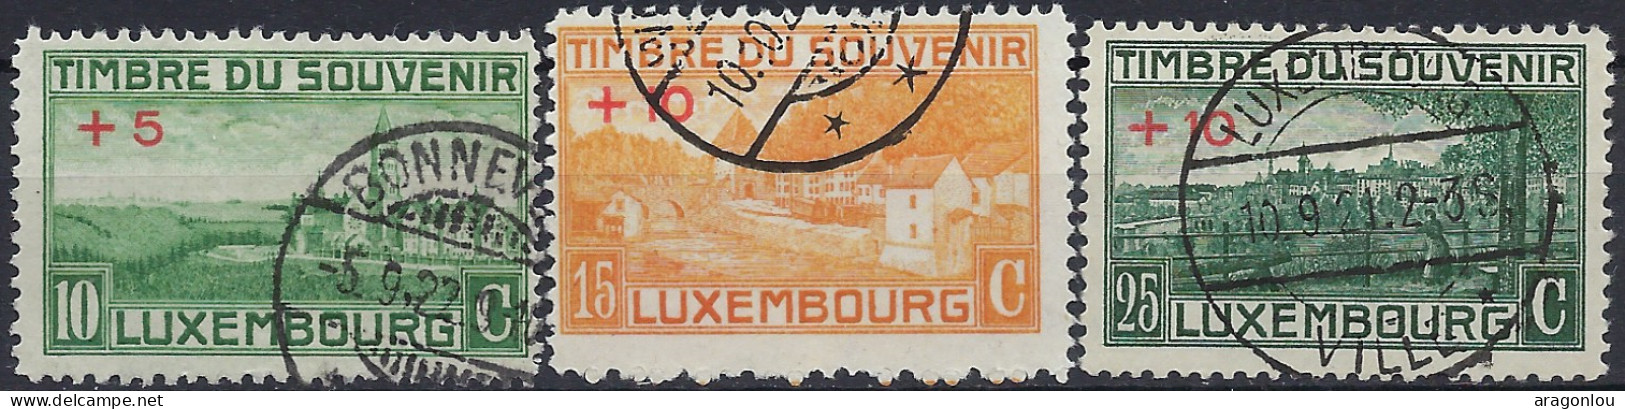 Luxembourg - Luxemburg - Timbres - 1921   1ière  Guerre Mondiale   Série   °   VC. 20,- - Gebraucht